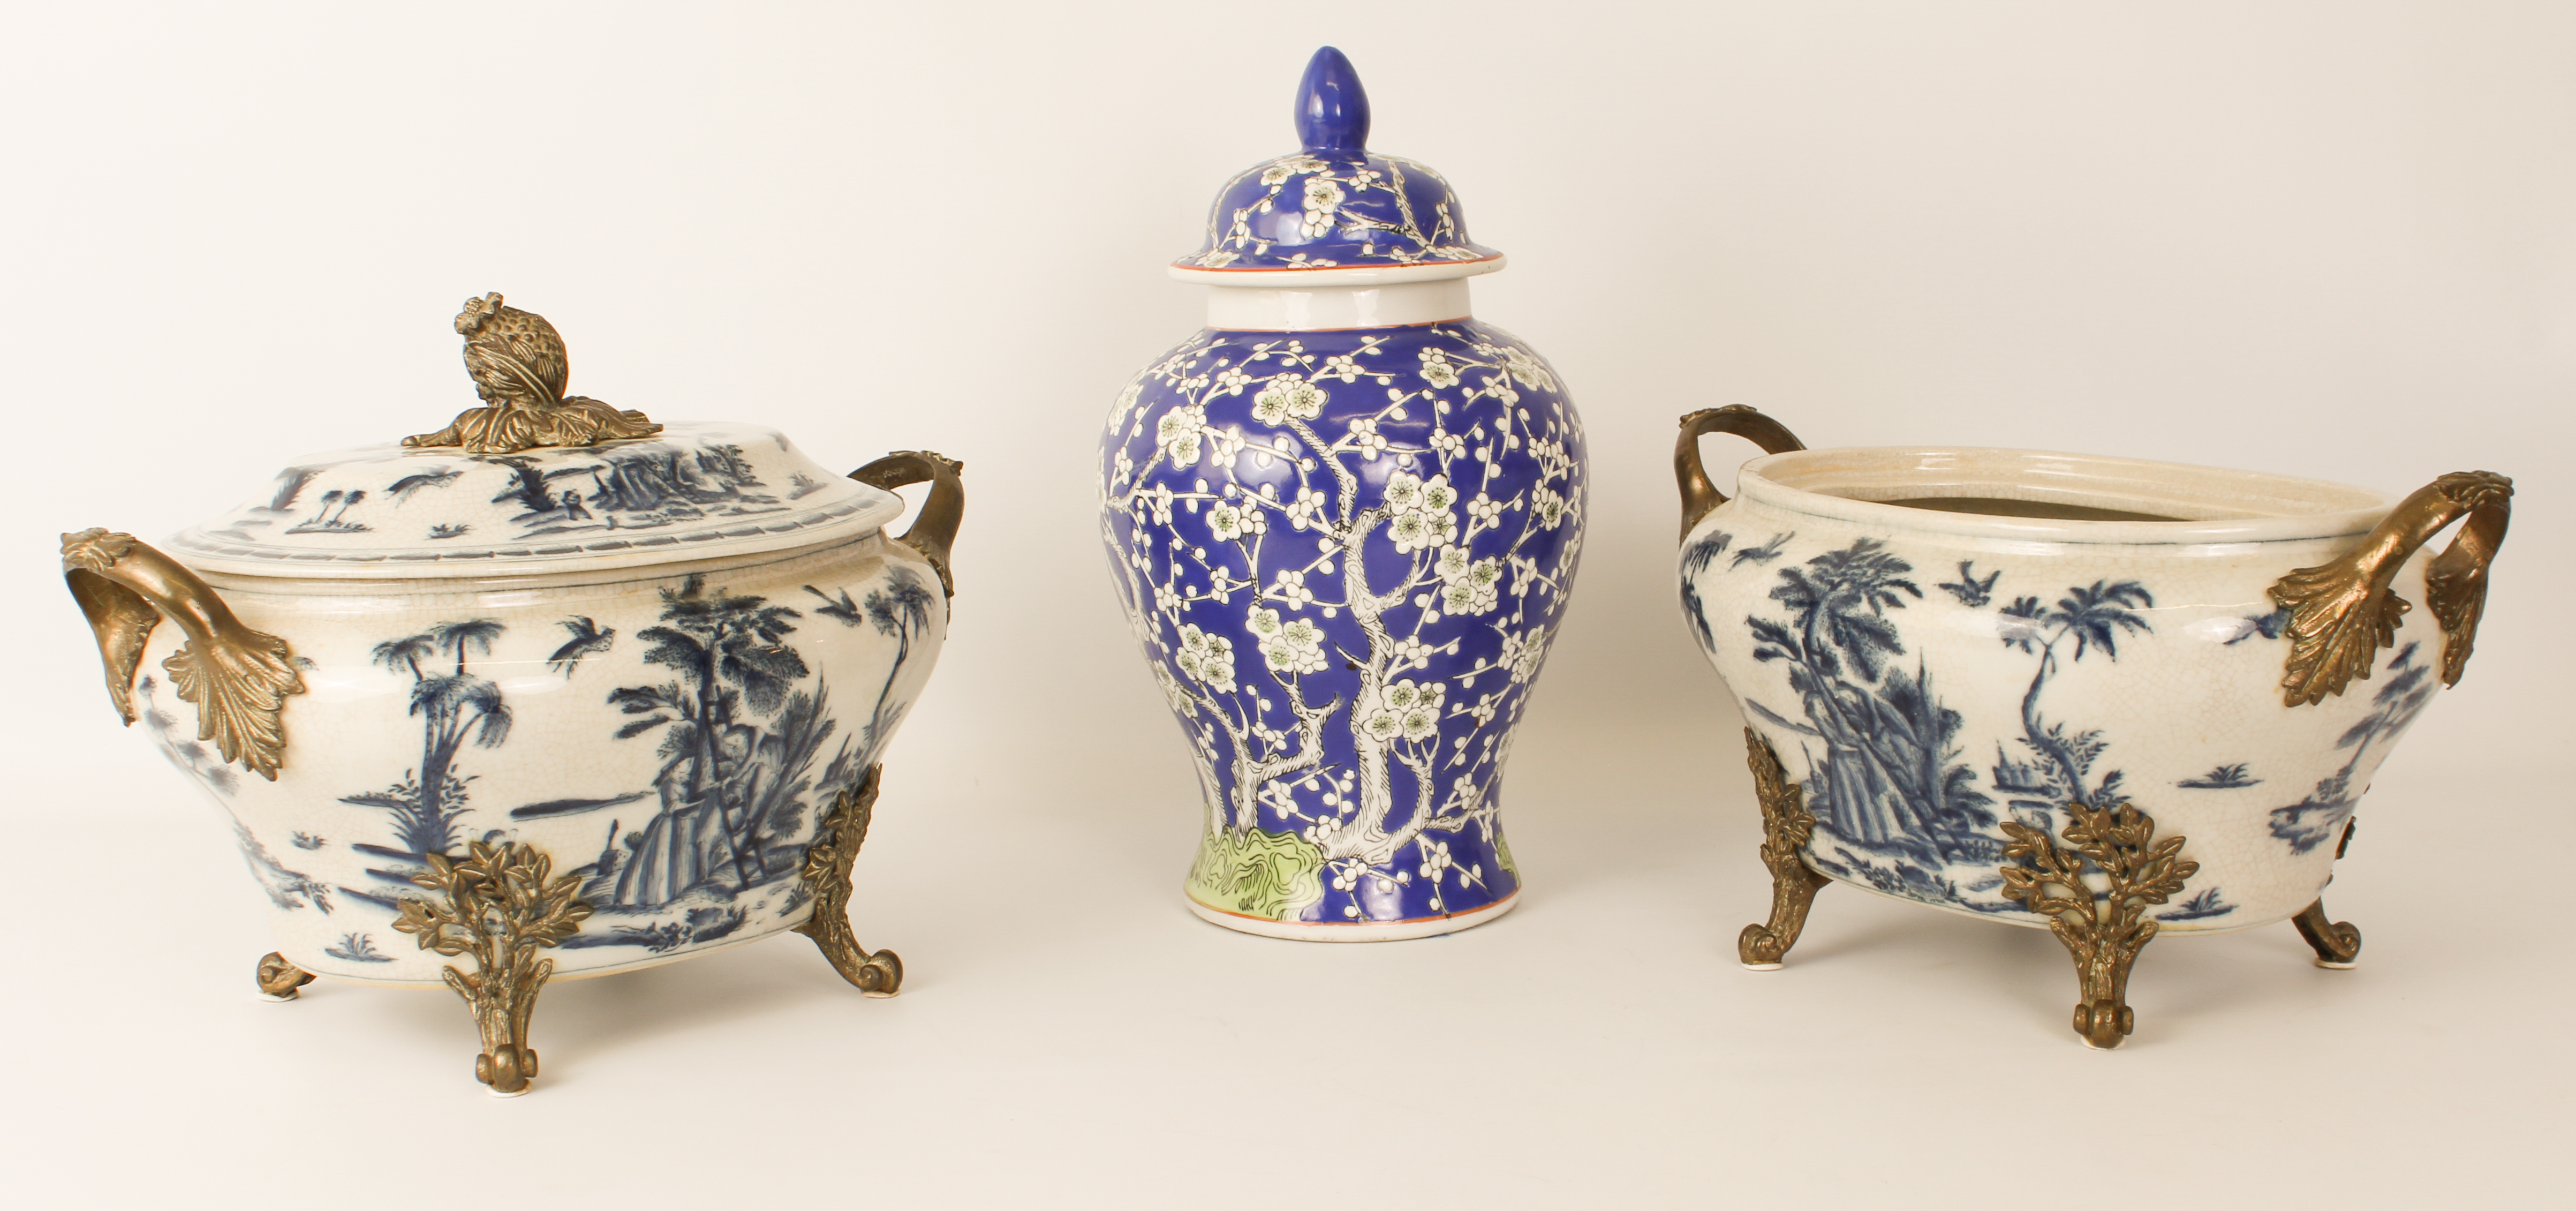 A blue and white porcelain covered tureen in 19th century style - modern, of bombe, oval form,